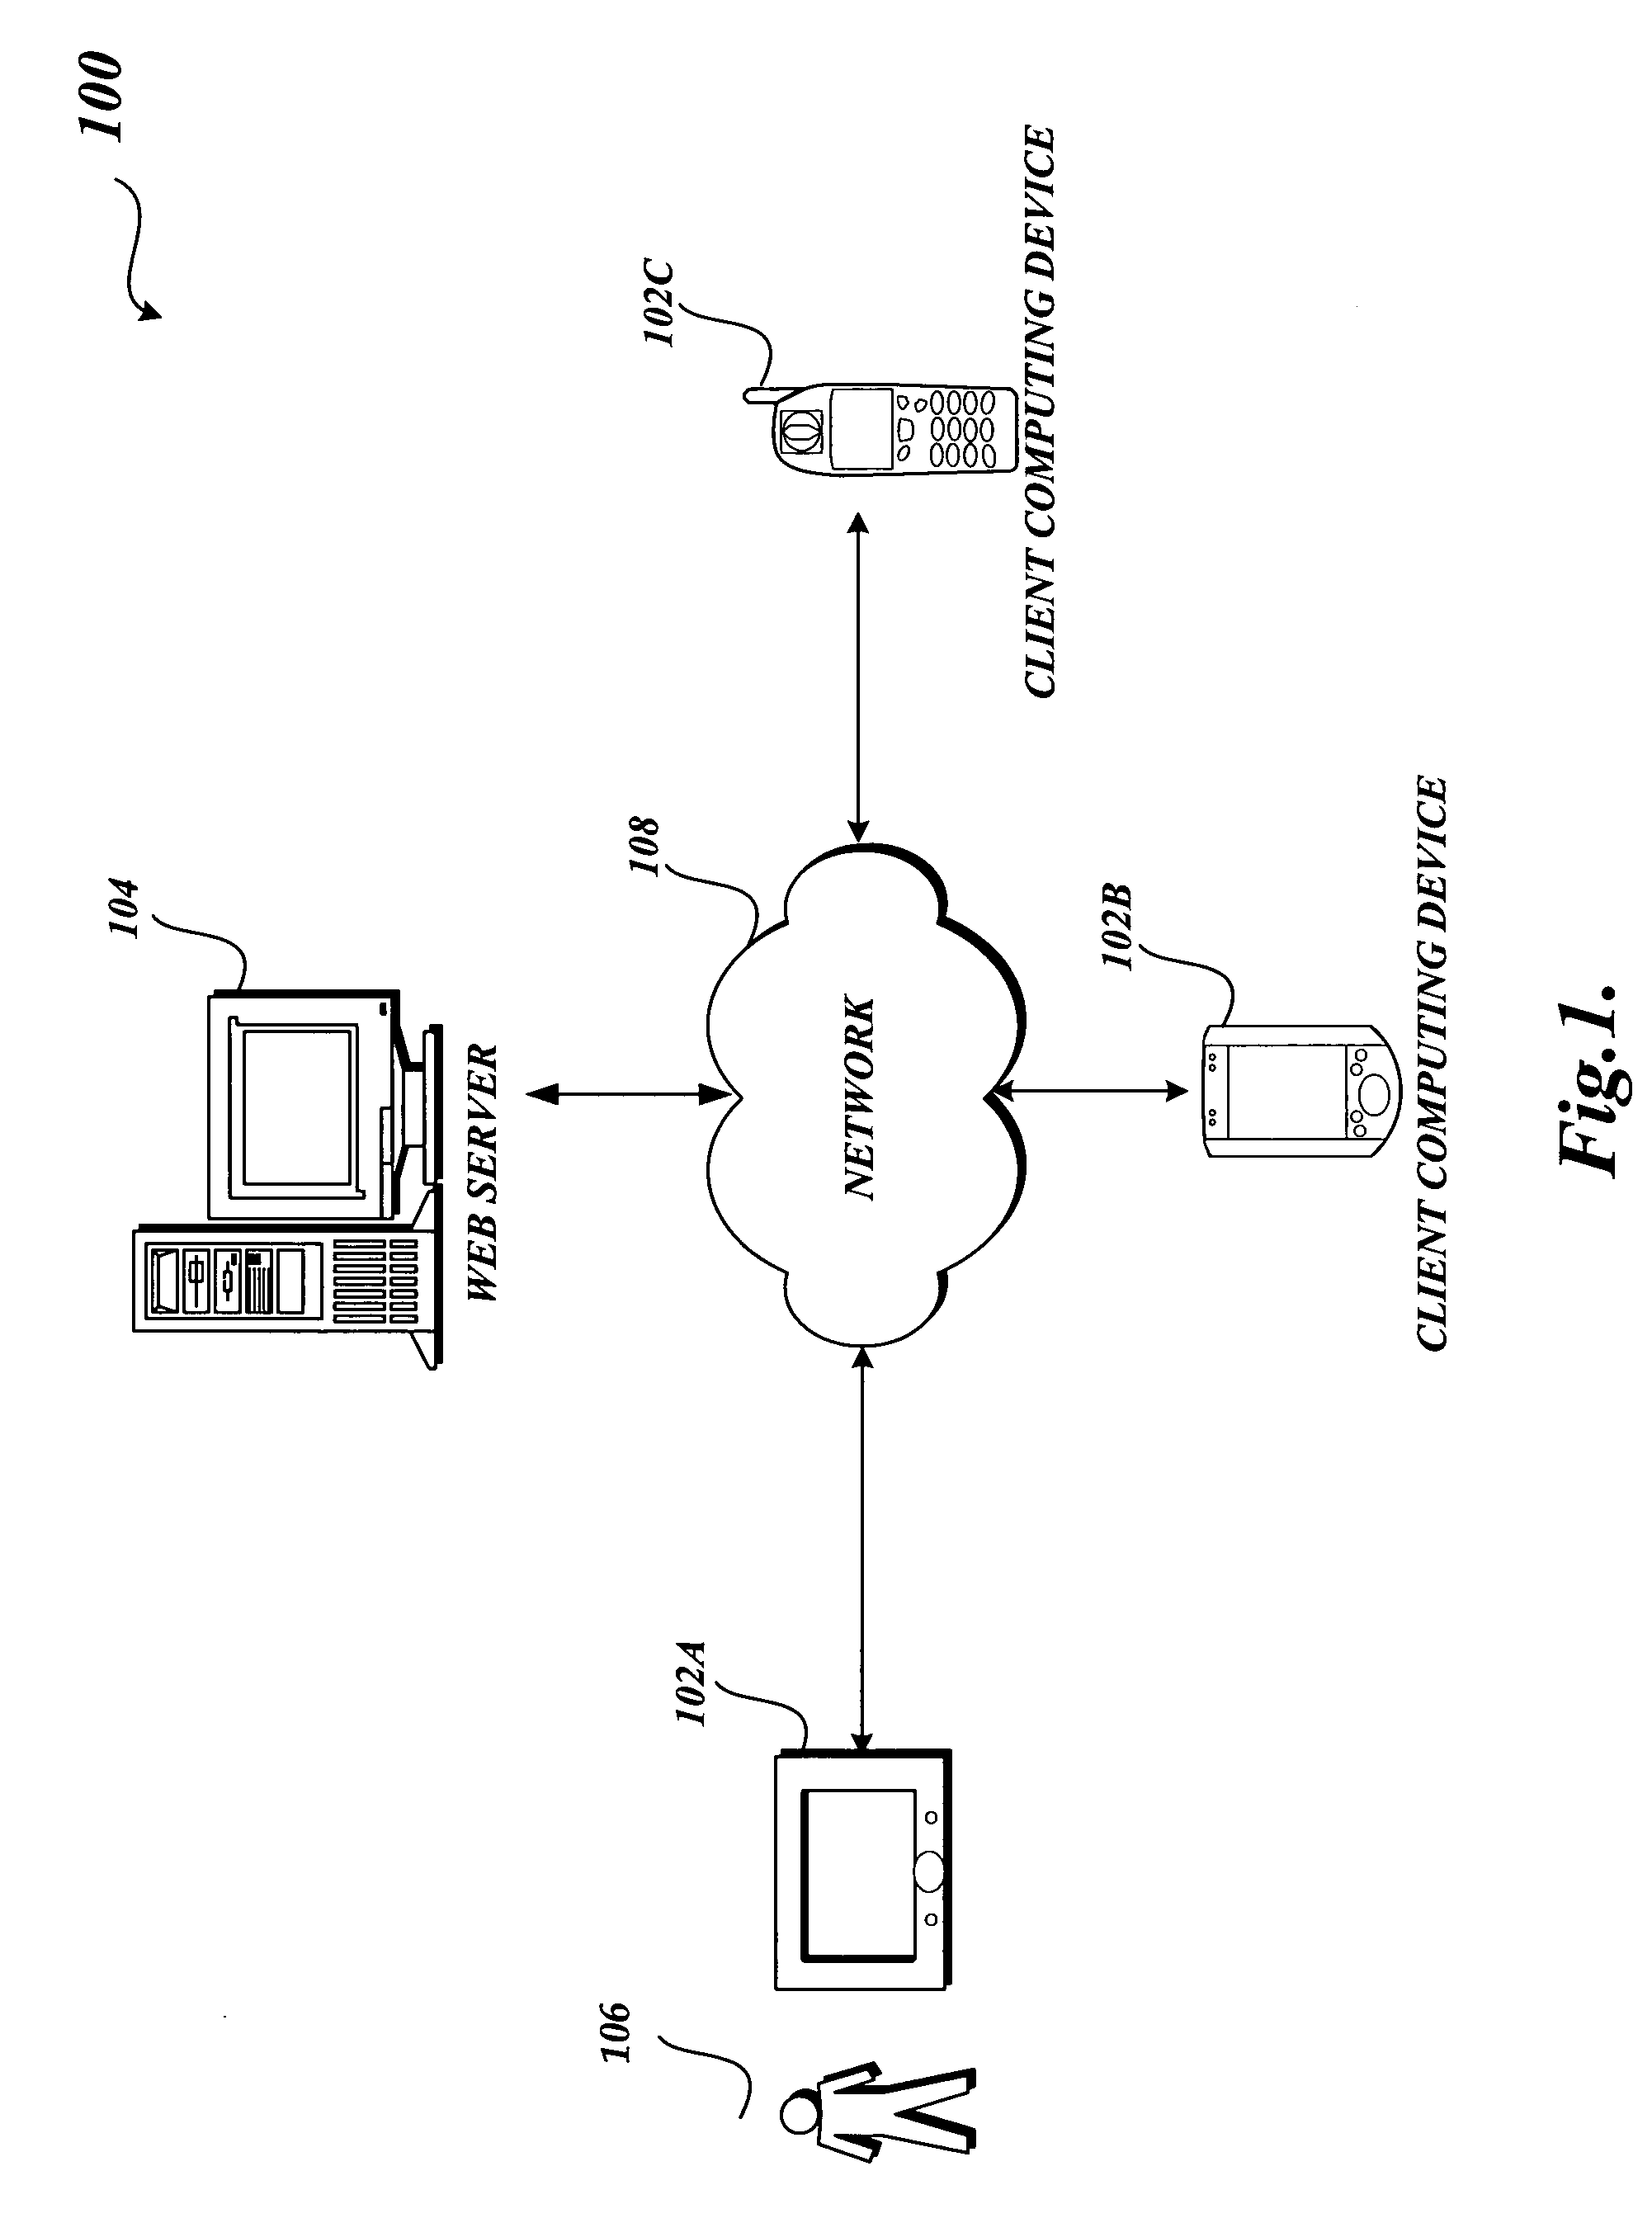 System and method of displaying content on small screen computing devices